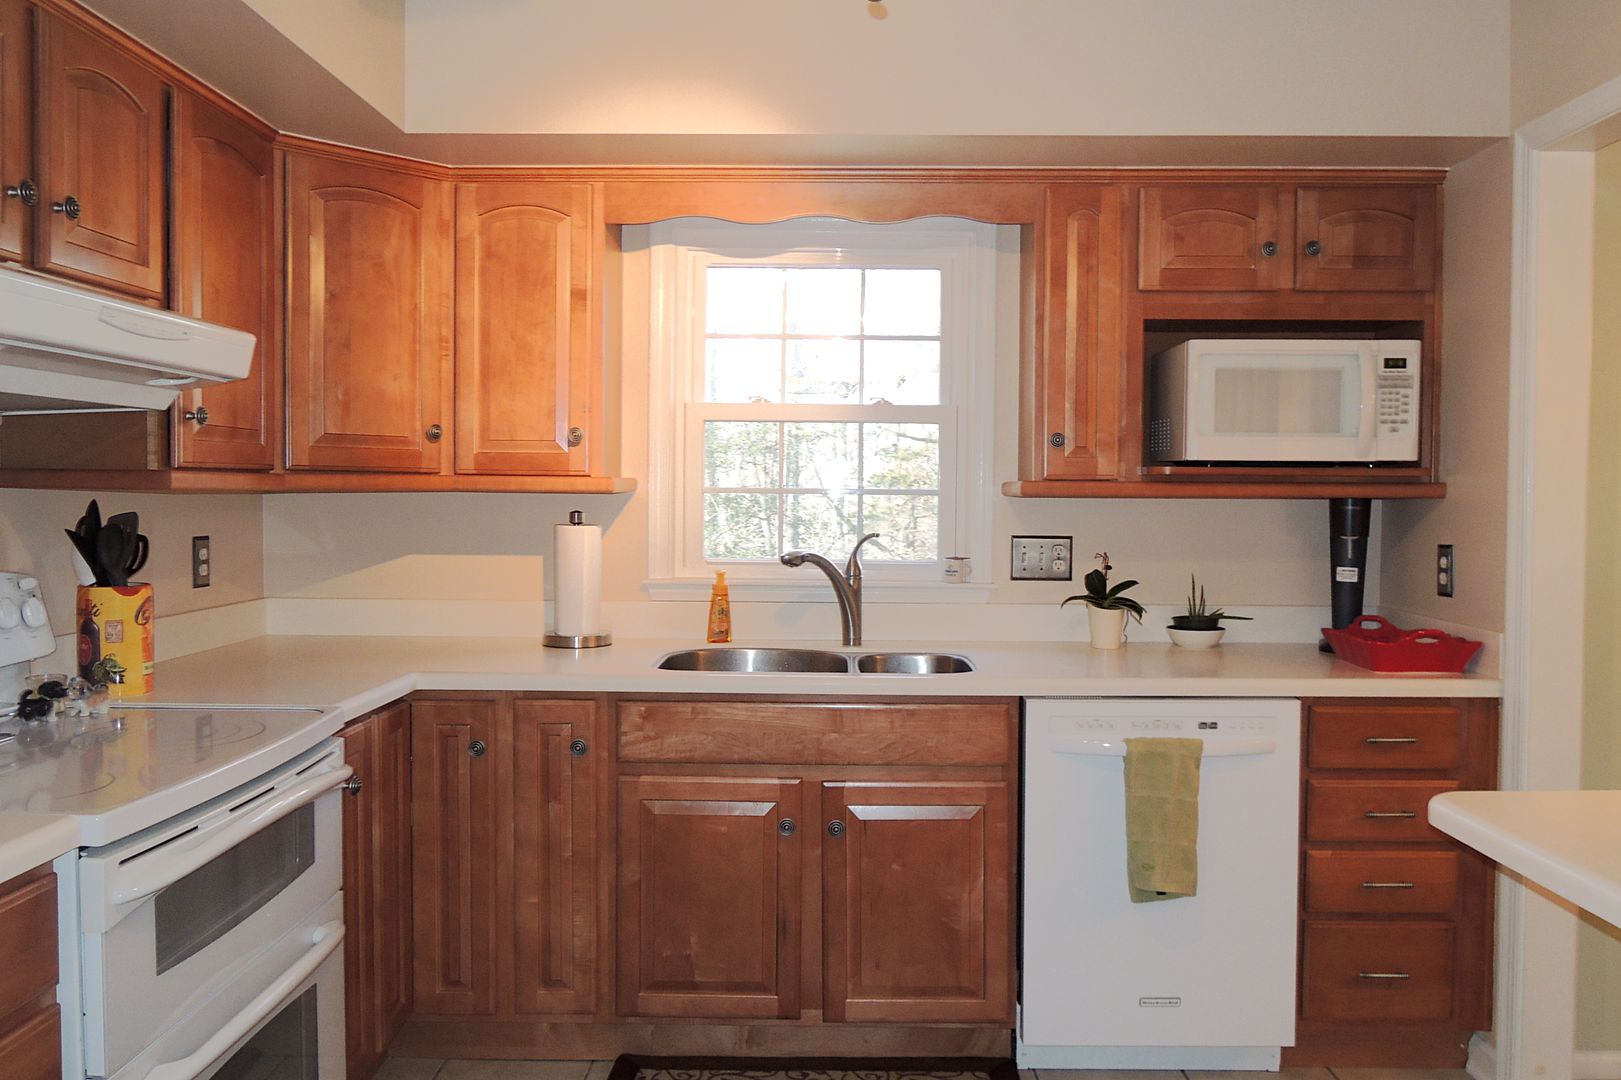 Beautiful updated kitchen in this La Plata Maryland Home for Sale in Mariellen Park.  Real Estate Sales by Marie Lally of O'Brien Realty of Southern mayrland